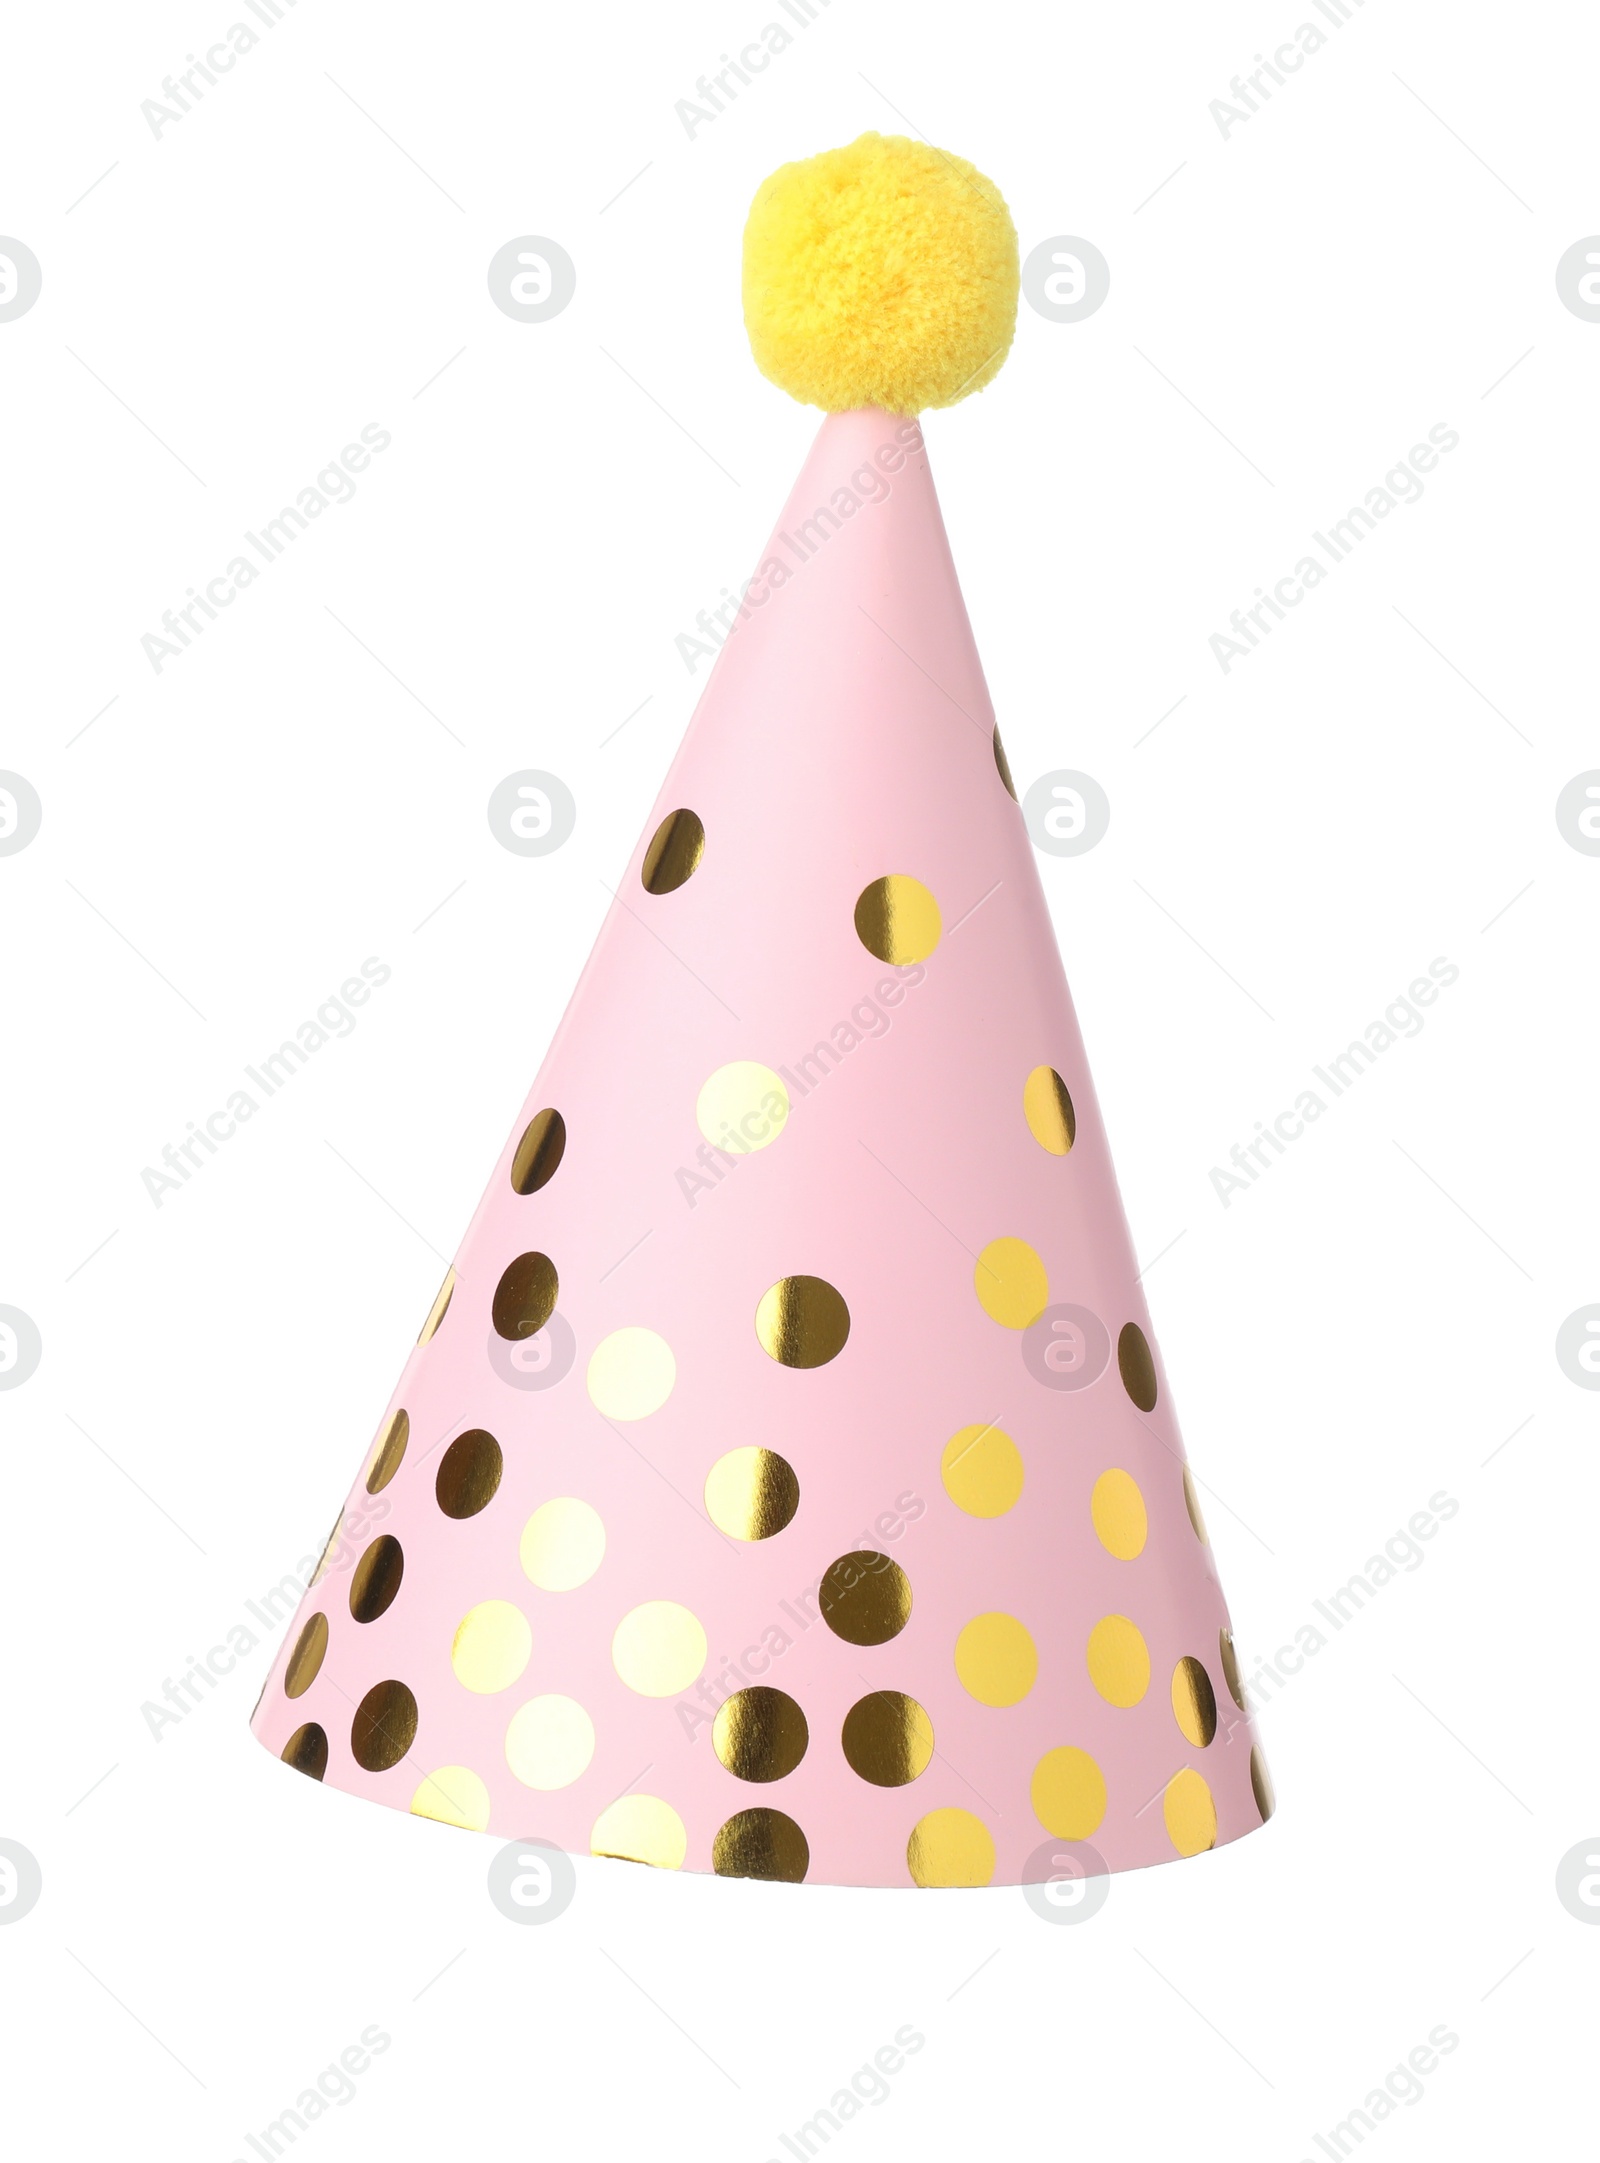 Photo of One pink party hat isolated on white